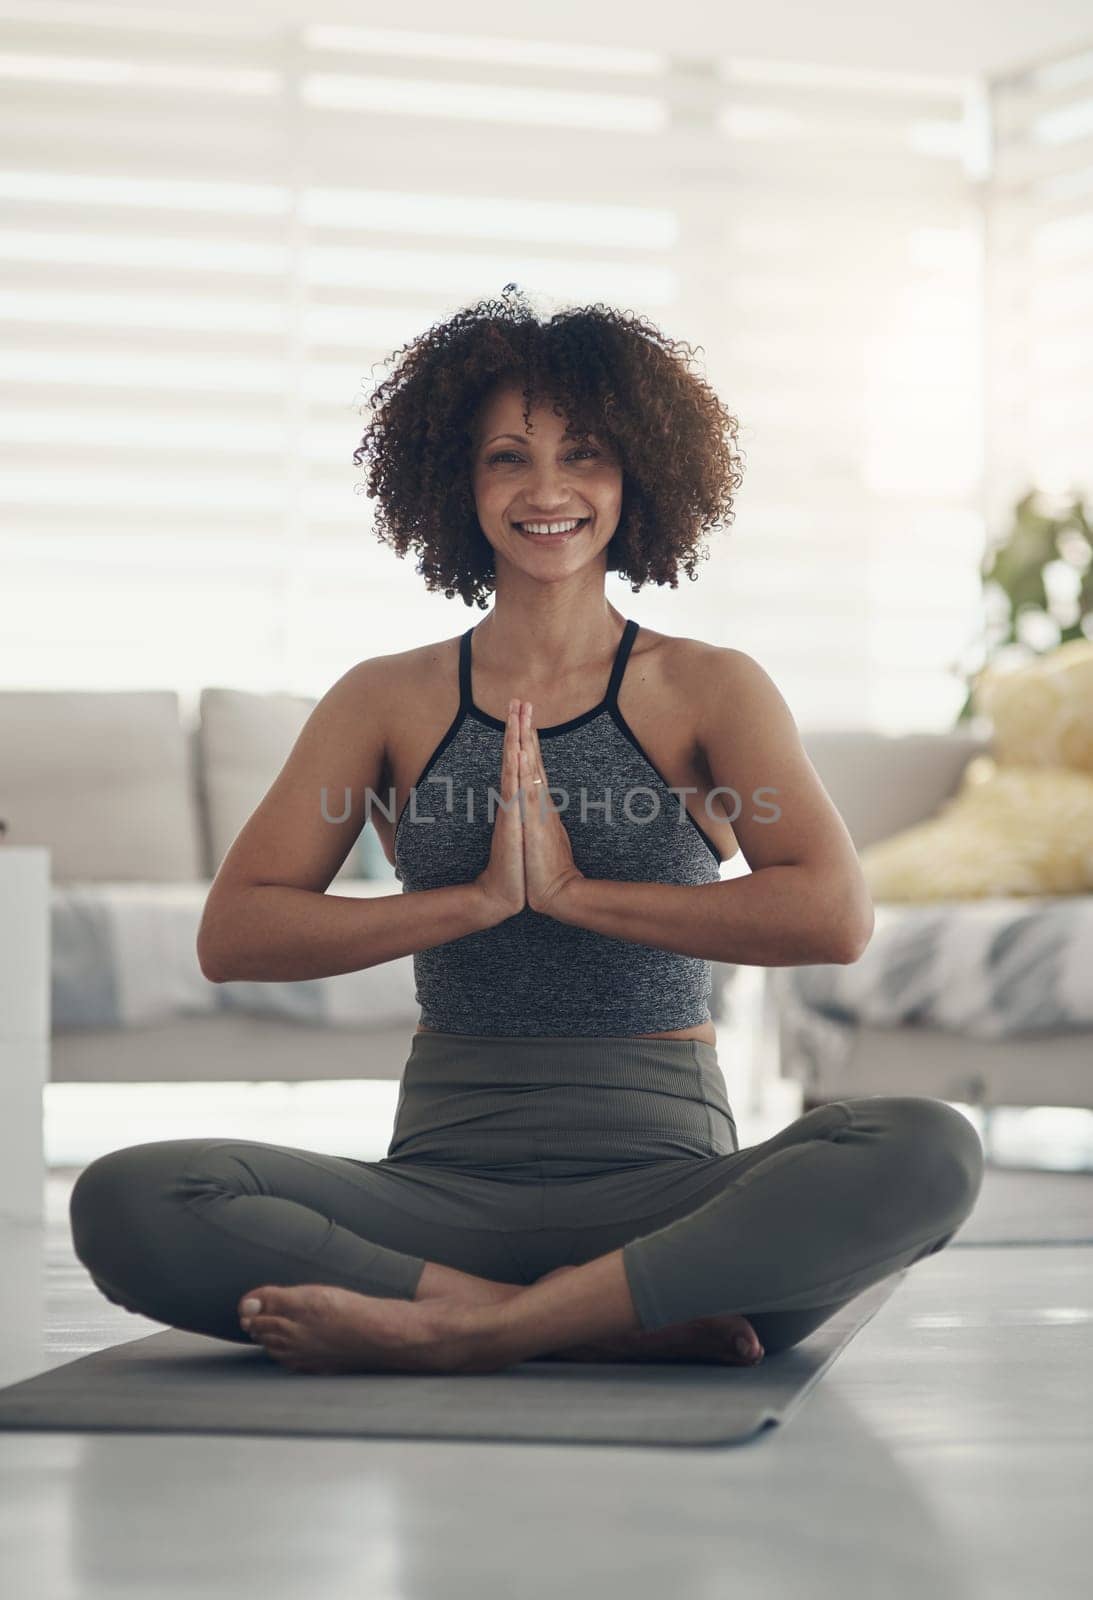 Thanking my body for this practice. Full length shot of an attractive young woman sitting alone in her living room and meditating